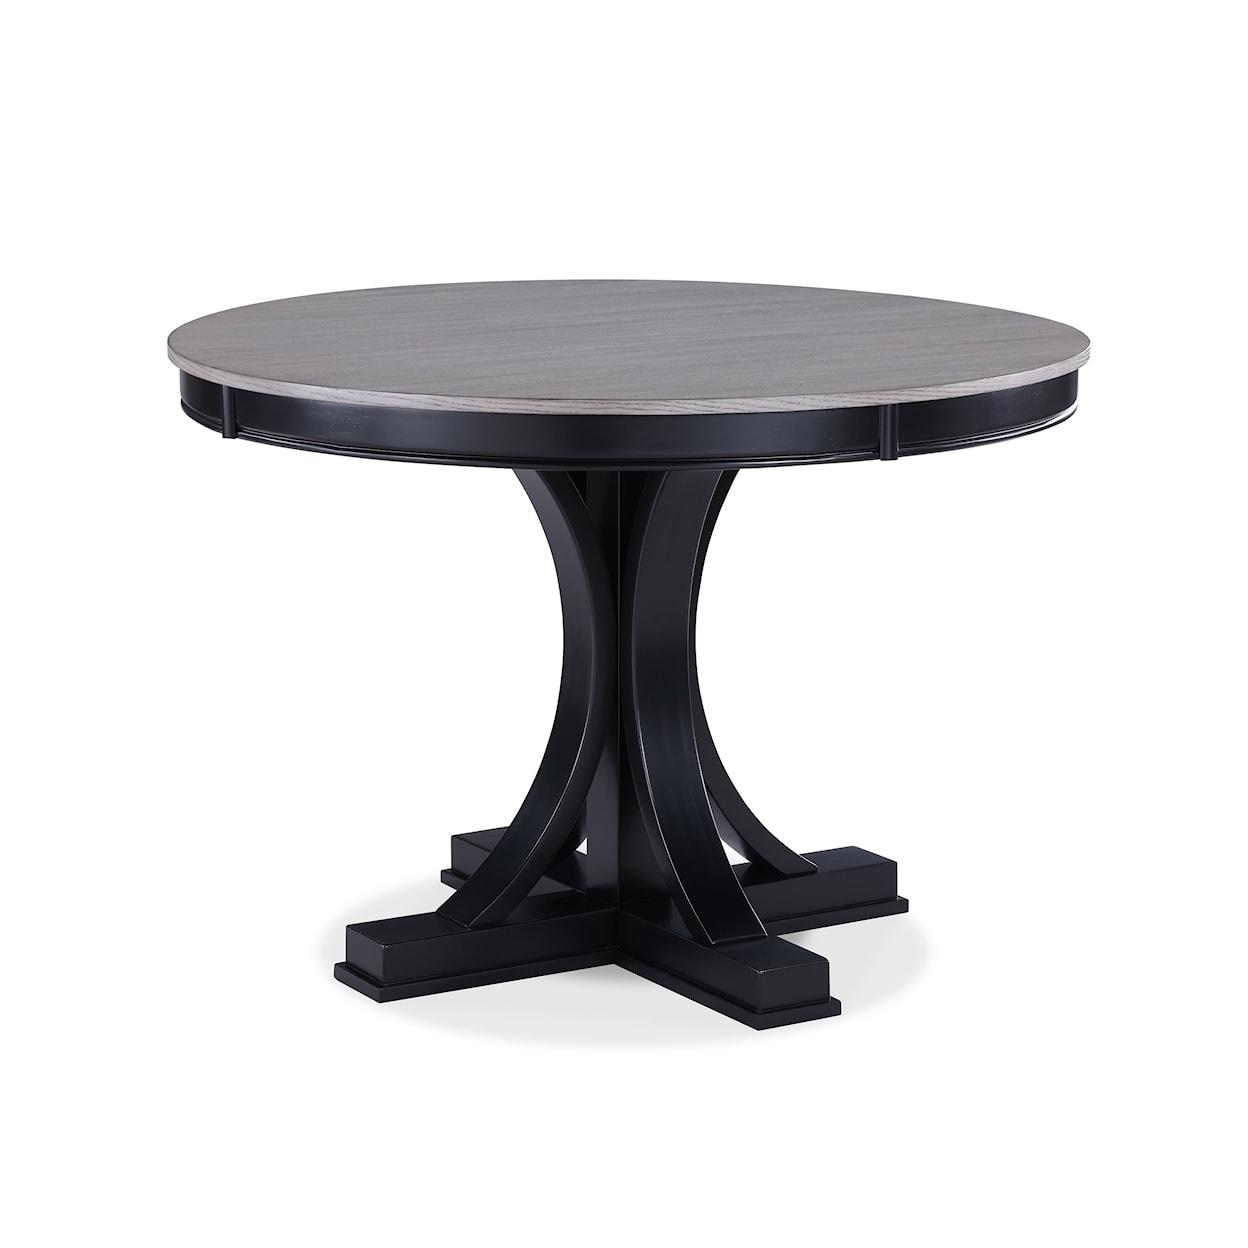 CM HARRIET Dining Table